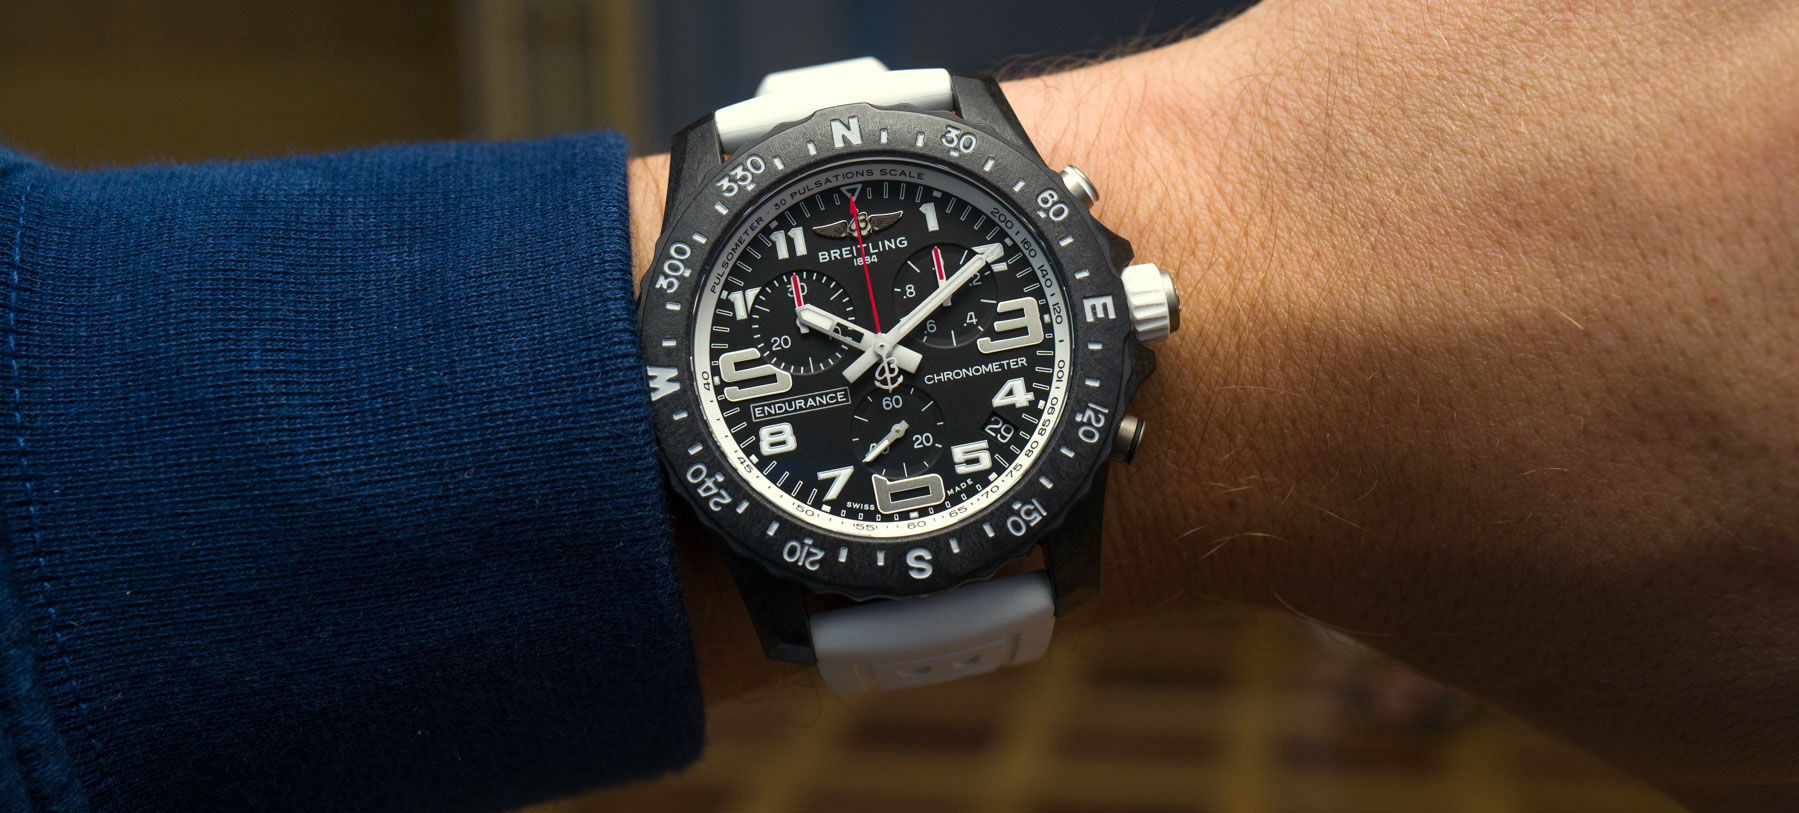 Hands-On With The Breitling Endurance Pro Watch For Athletes